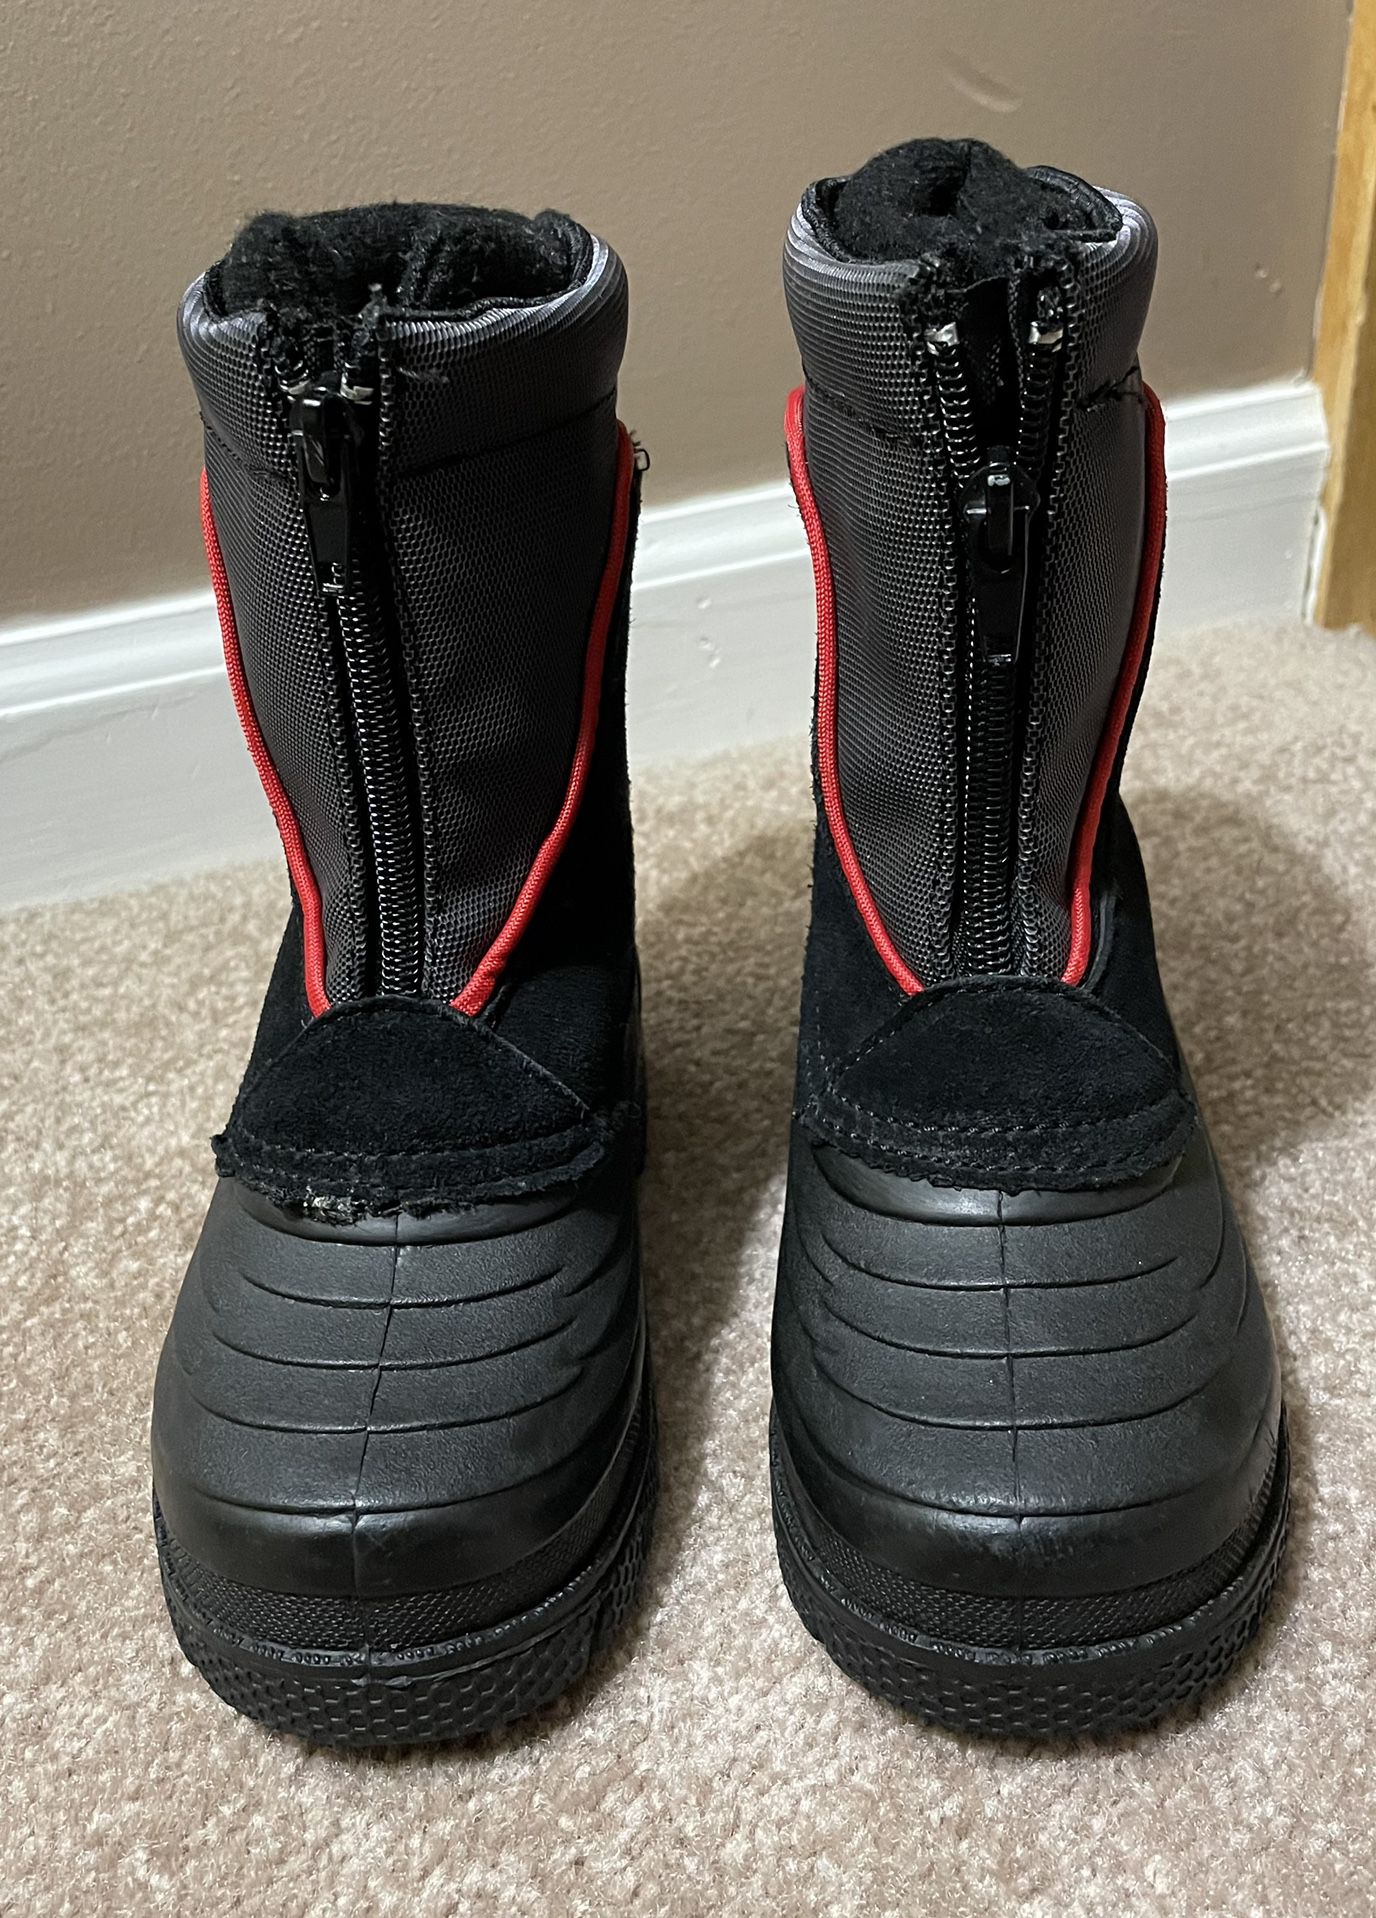 Toddler Snow Boots - Size 9